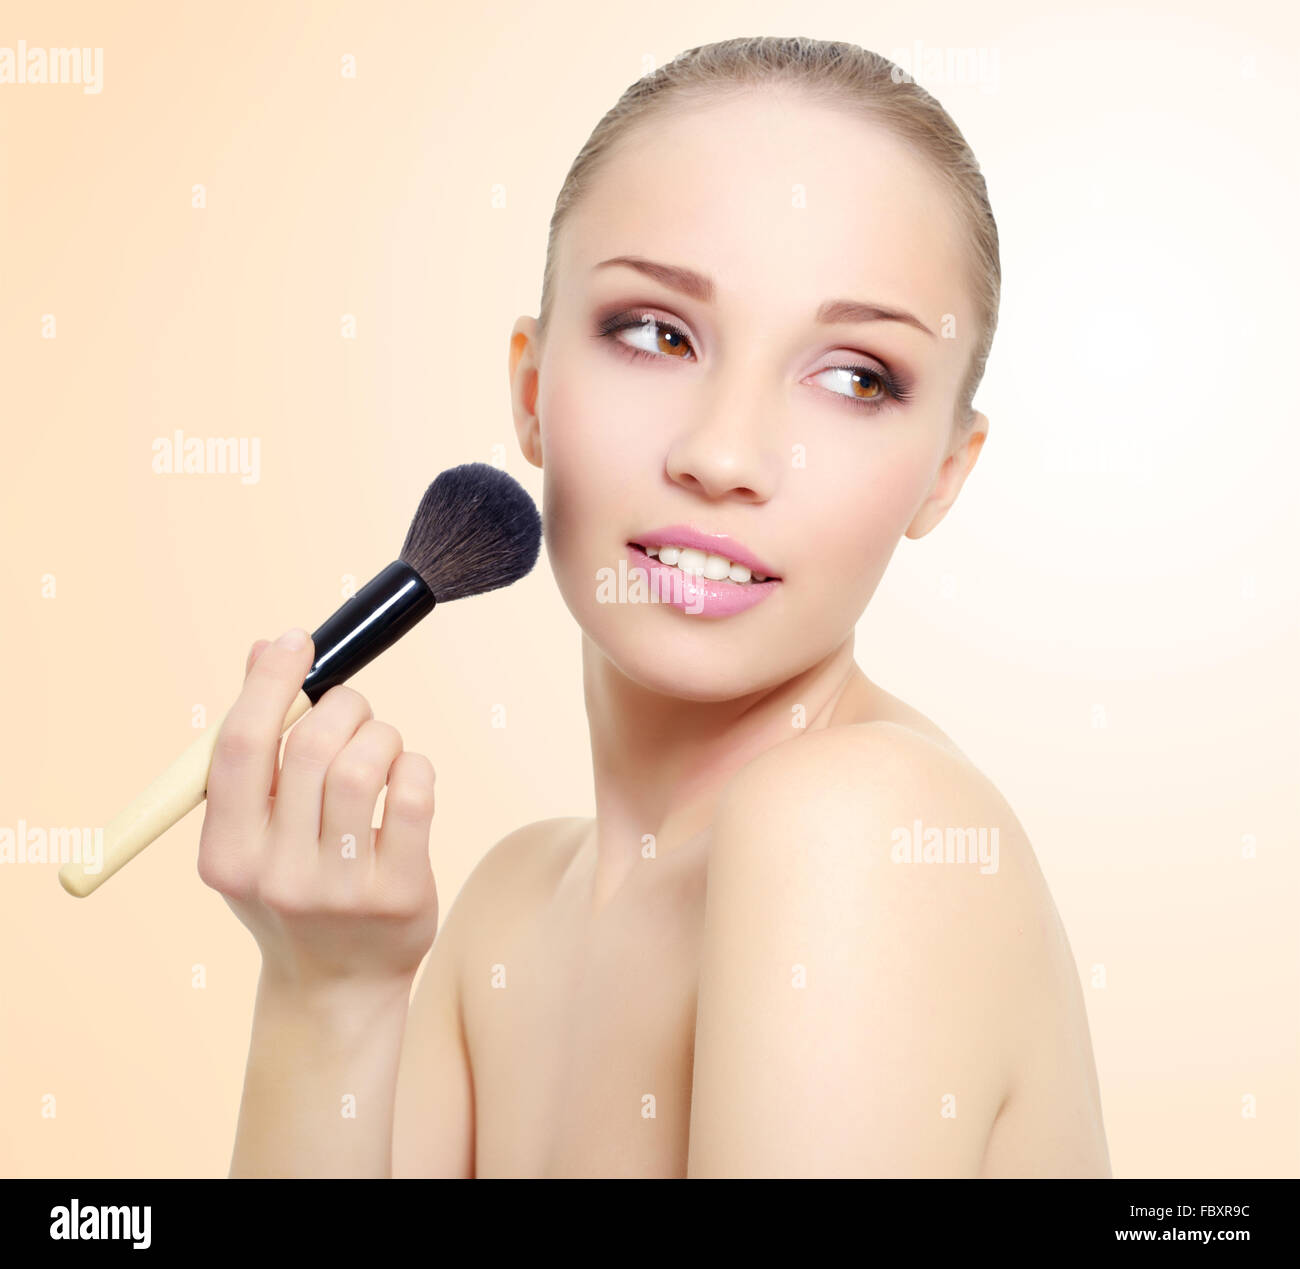 Portrait of girl with make-up brush Stock Photo